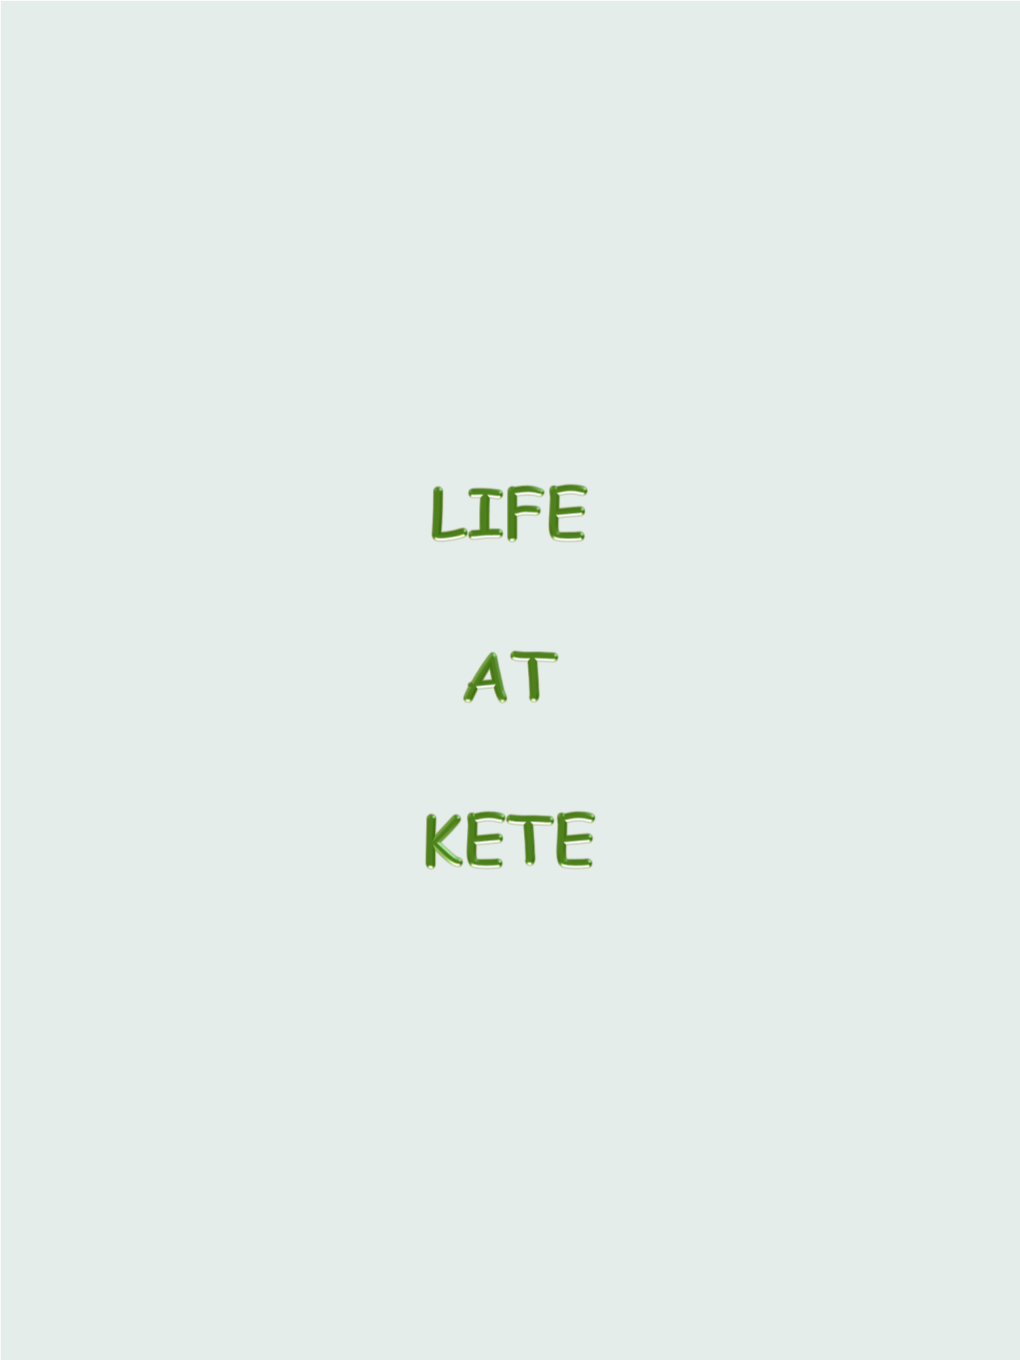 Kete on the Dale Peninsula in the County of Pembrokeshire in South West Wales Began in 1944